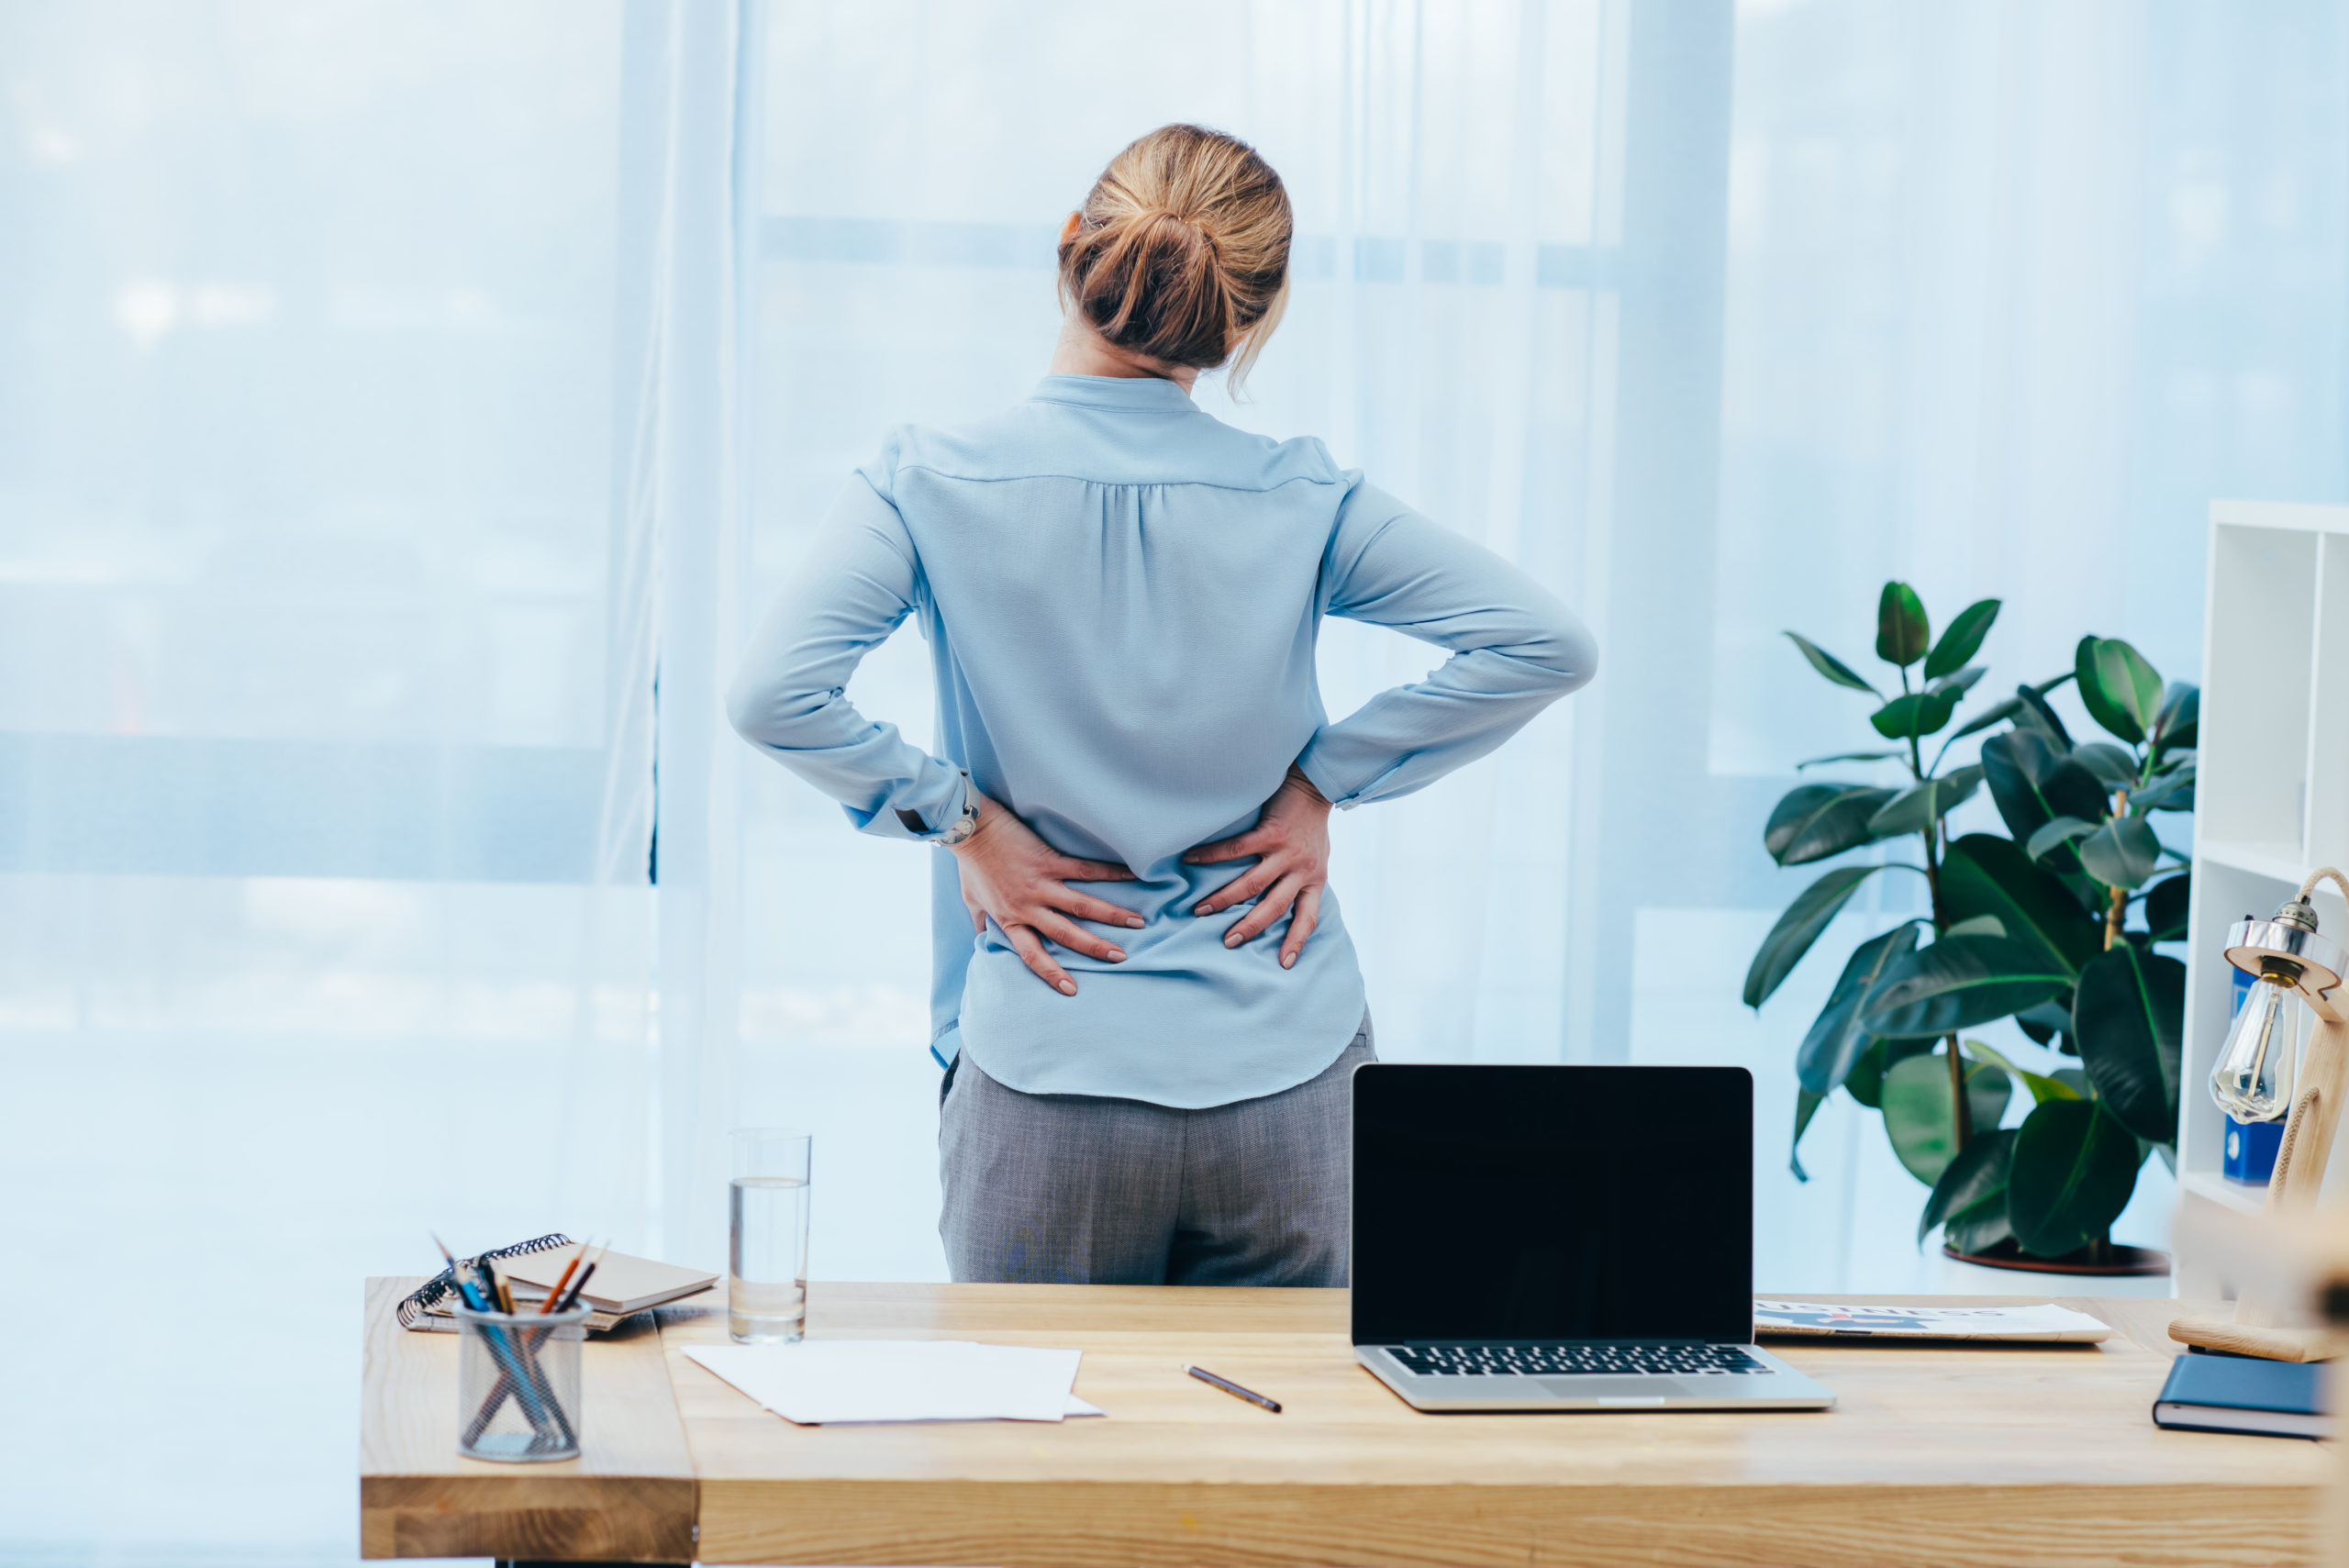 Workers Compensation Wasatch Peak Physical Therapy-Layton-Back Pain